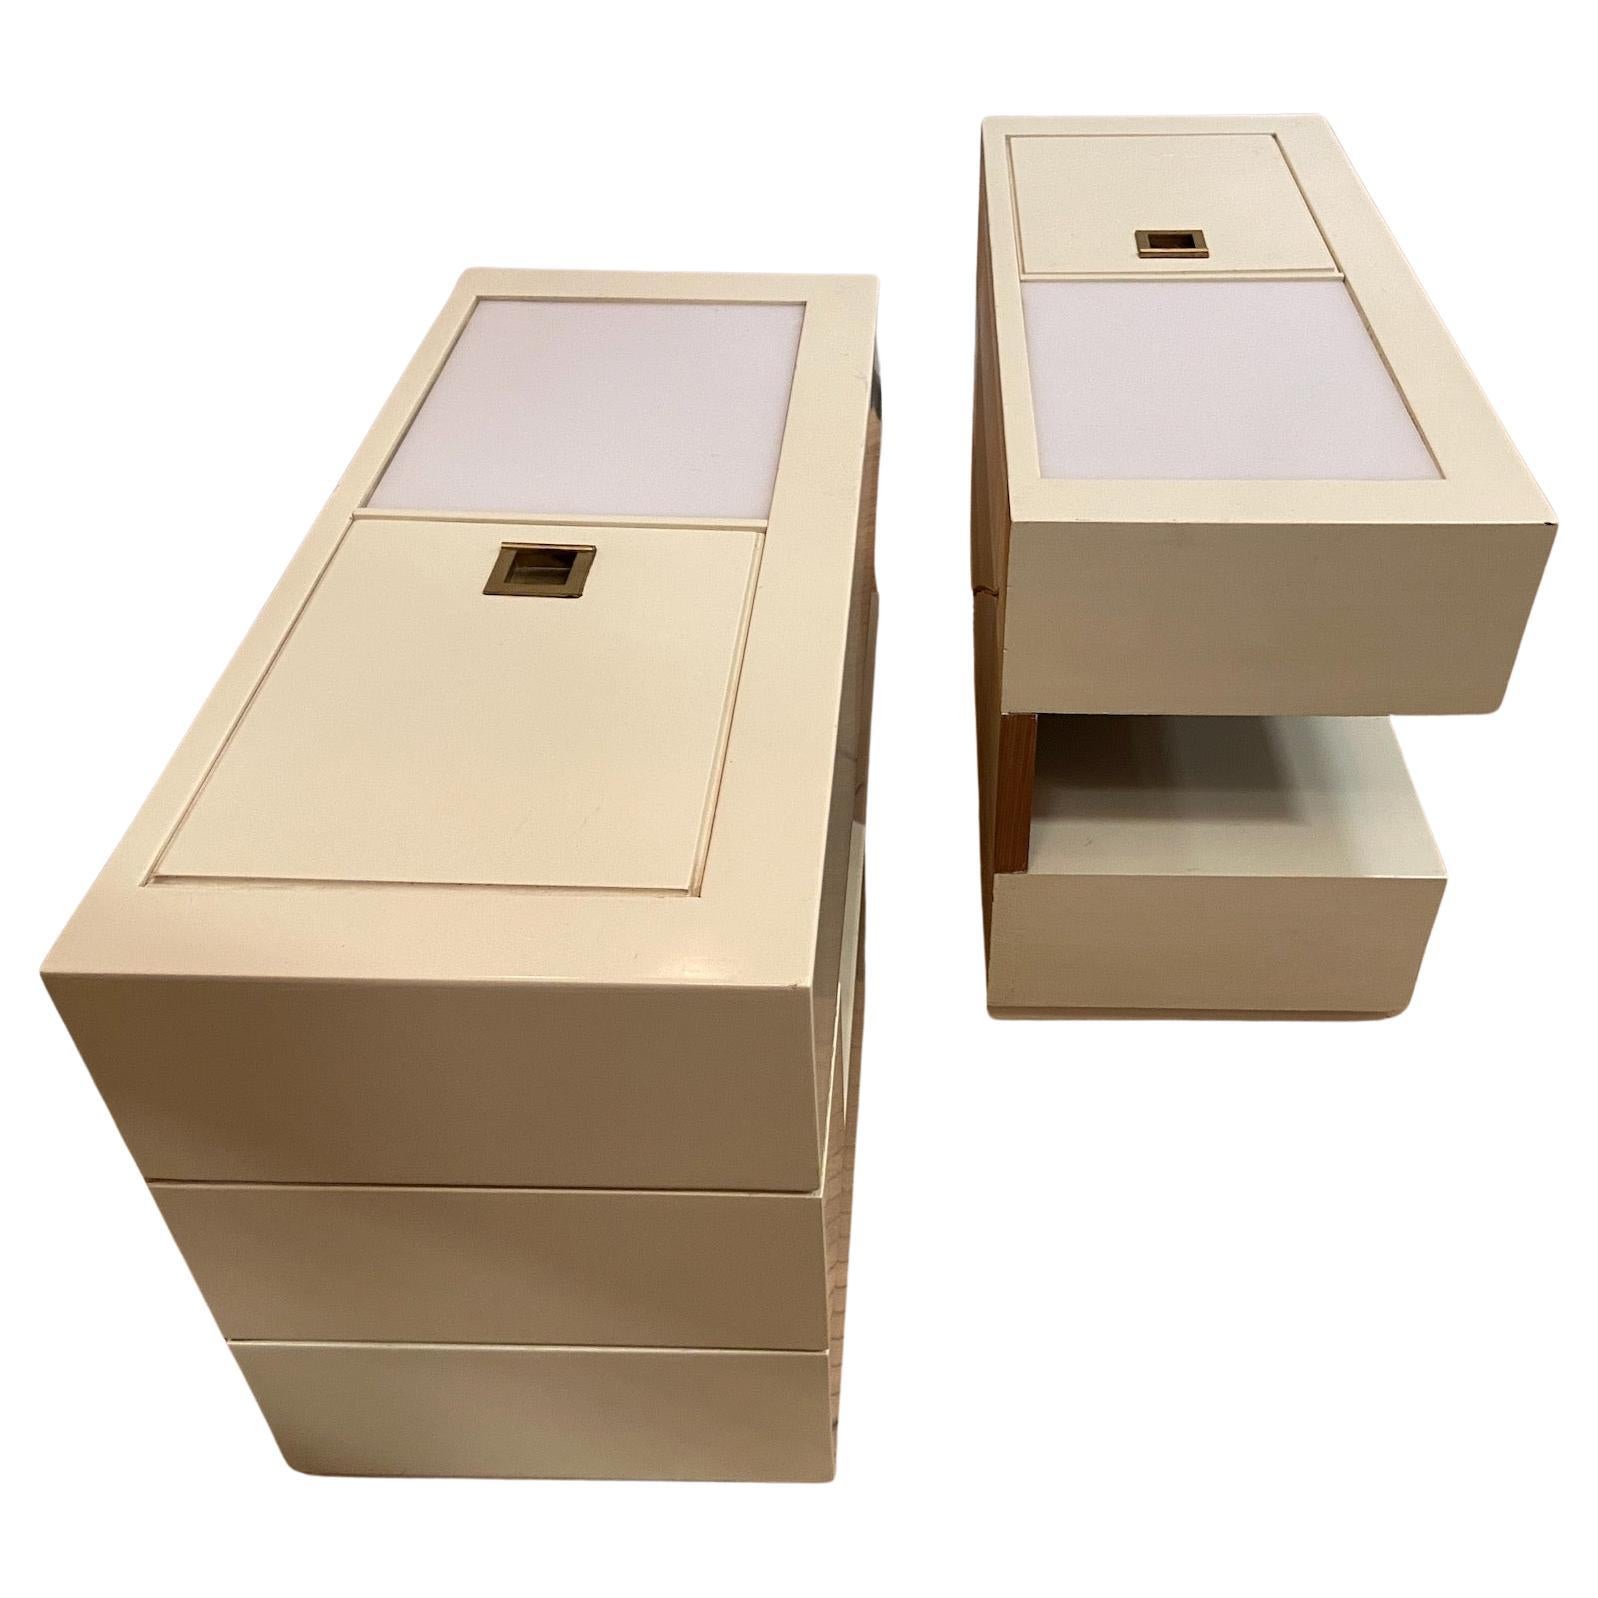 off white lacquered and wood modernist cabinets / night stands/ end tables ... with internal lights under a white acrylic cover. Switches in the recesses. A good modernist pair.